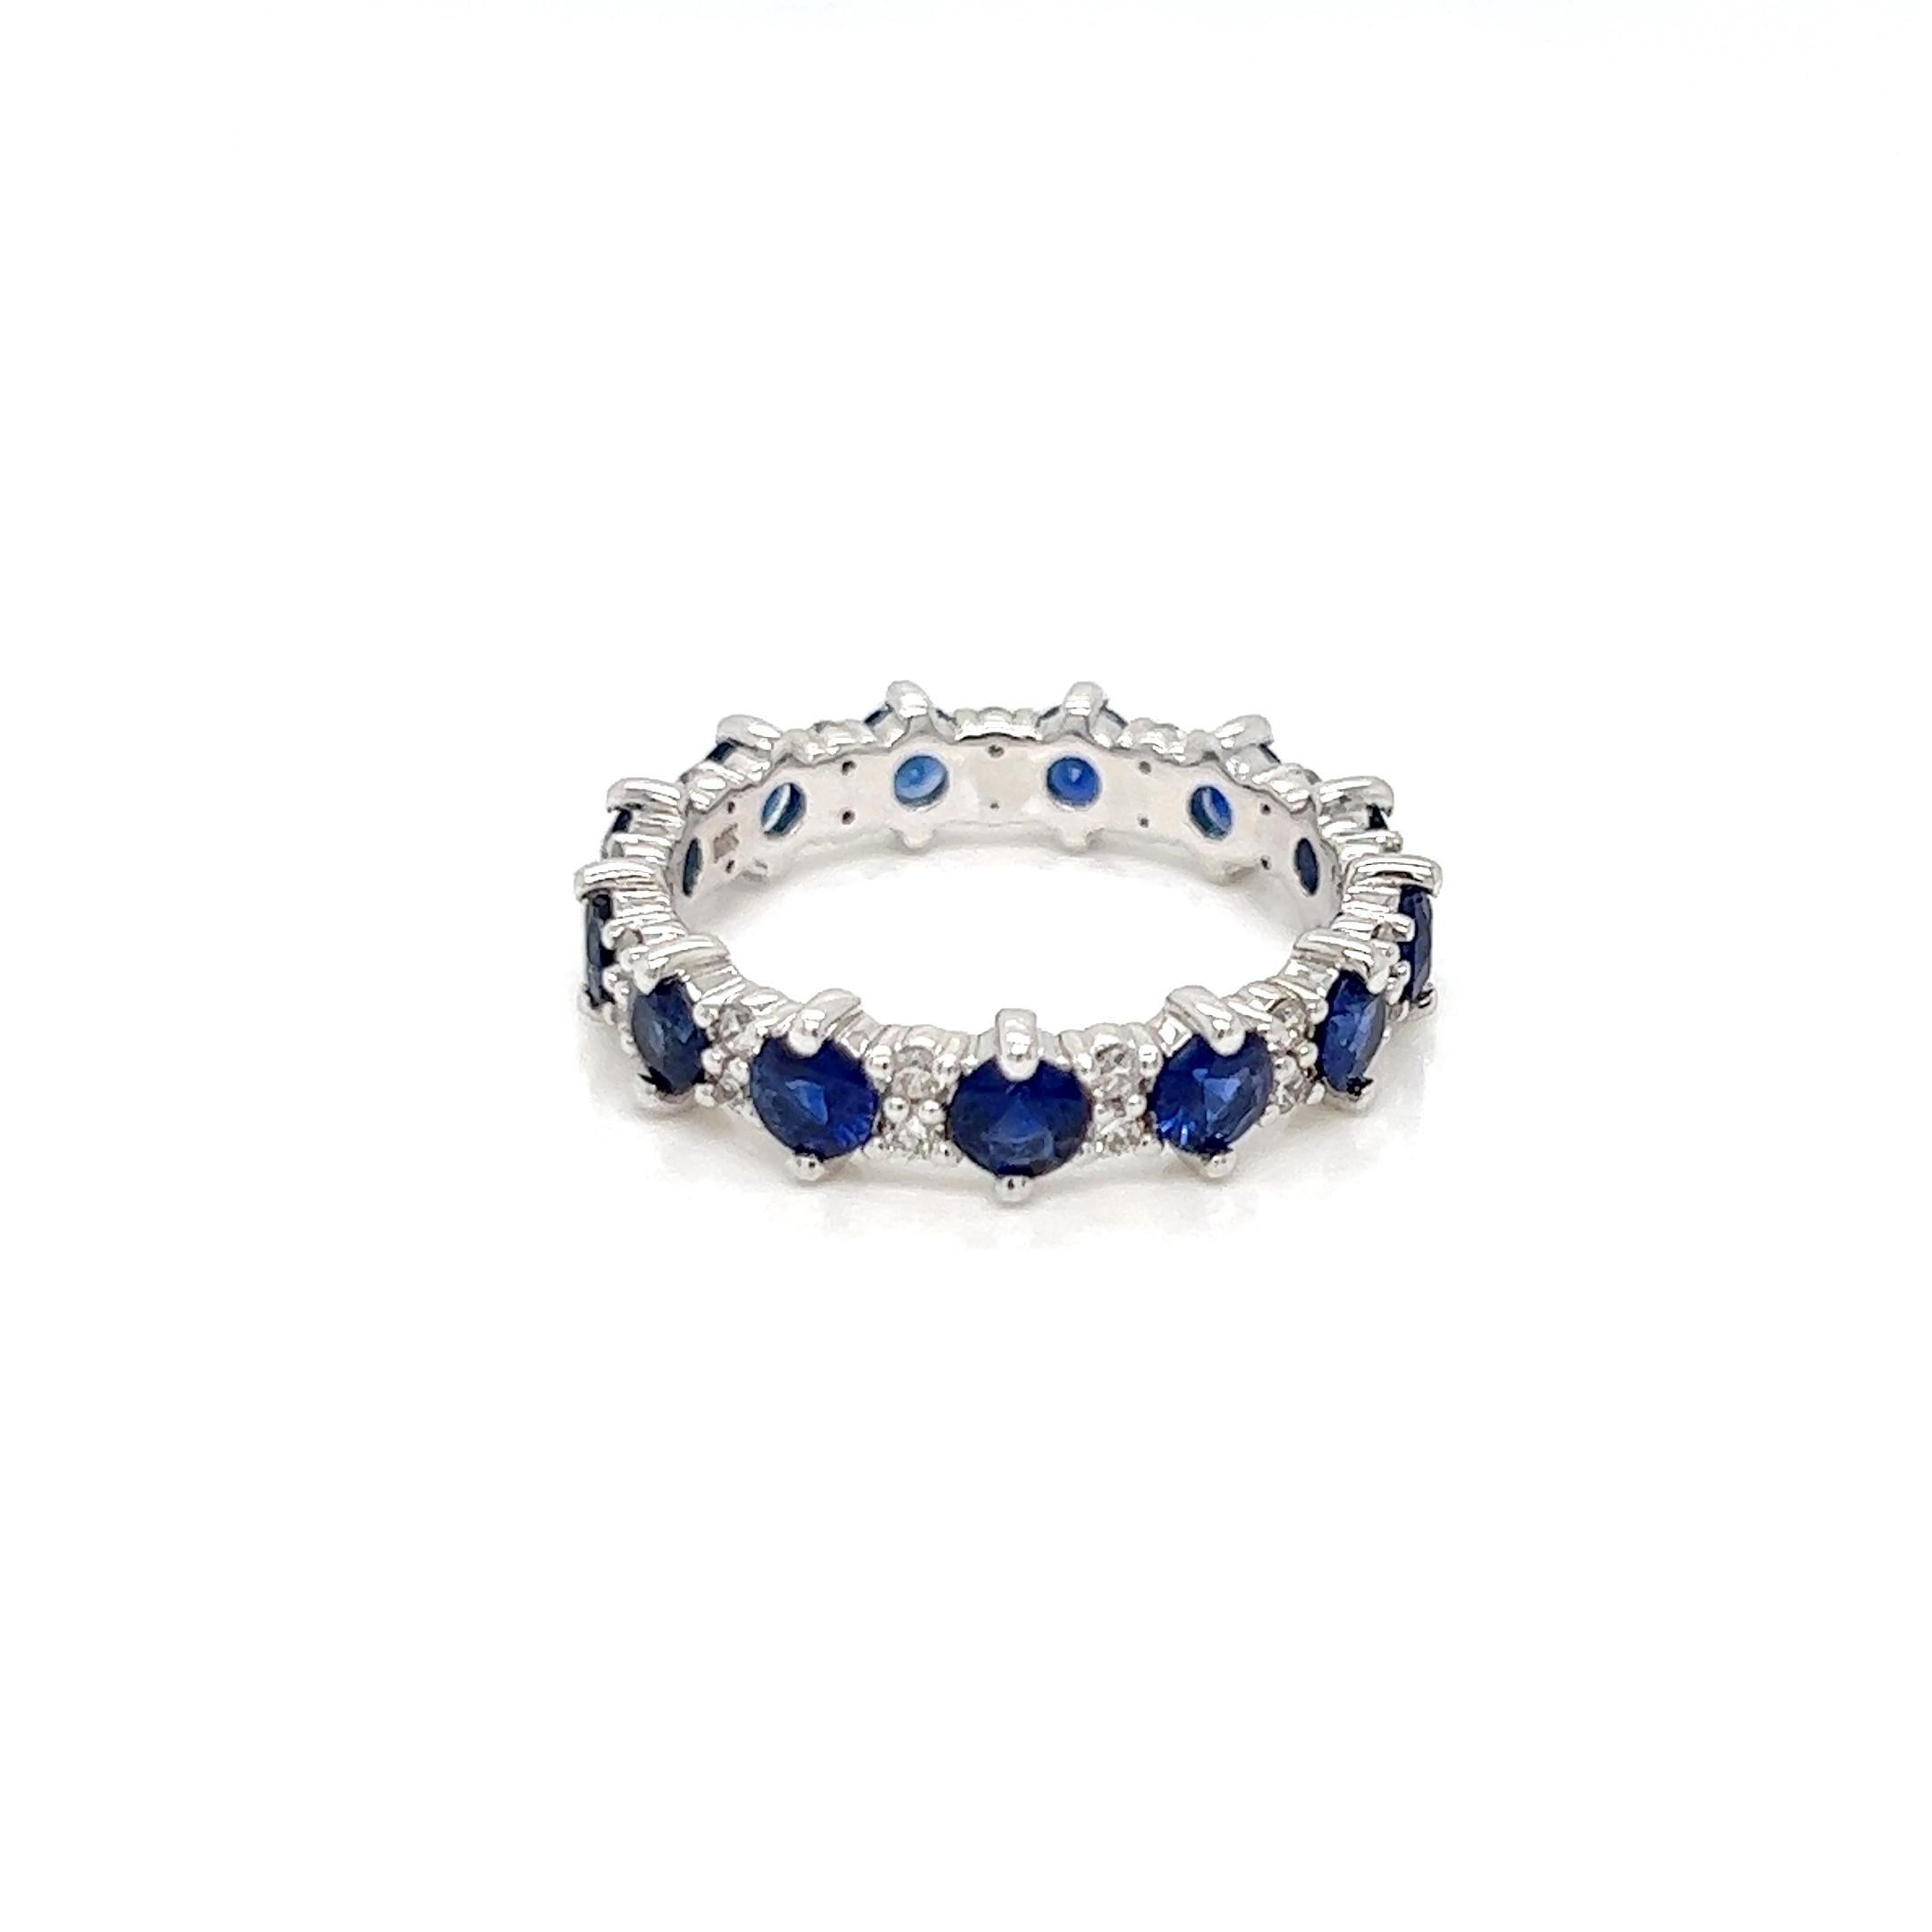 Round Cut 2.37 Carats Sapphire Diamond Eternity Band Ring in 18k White Gold For Sale